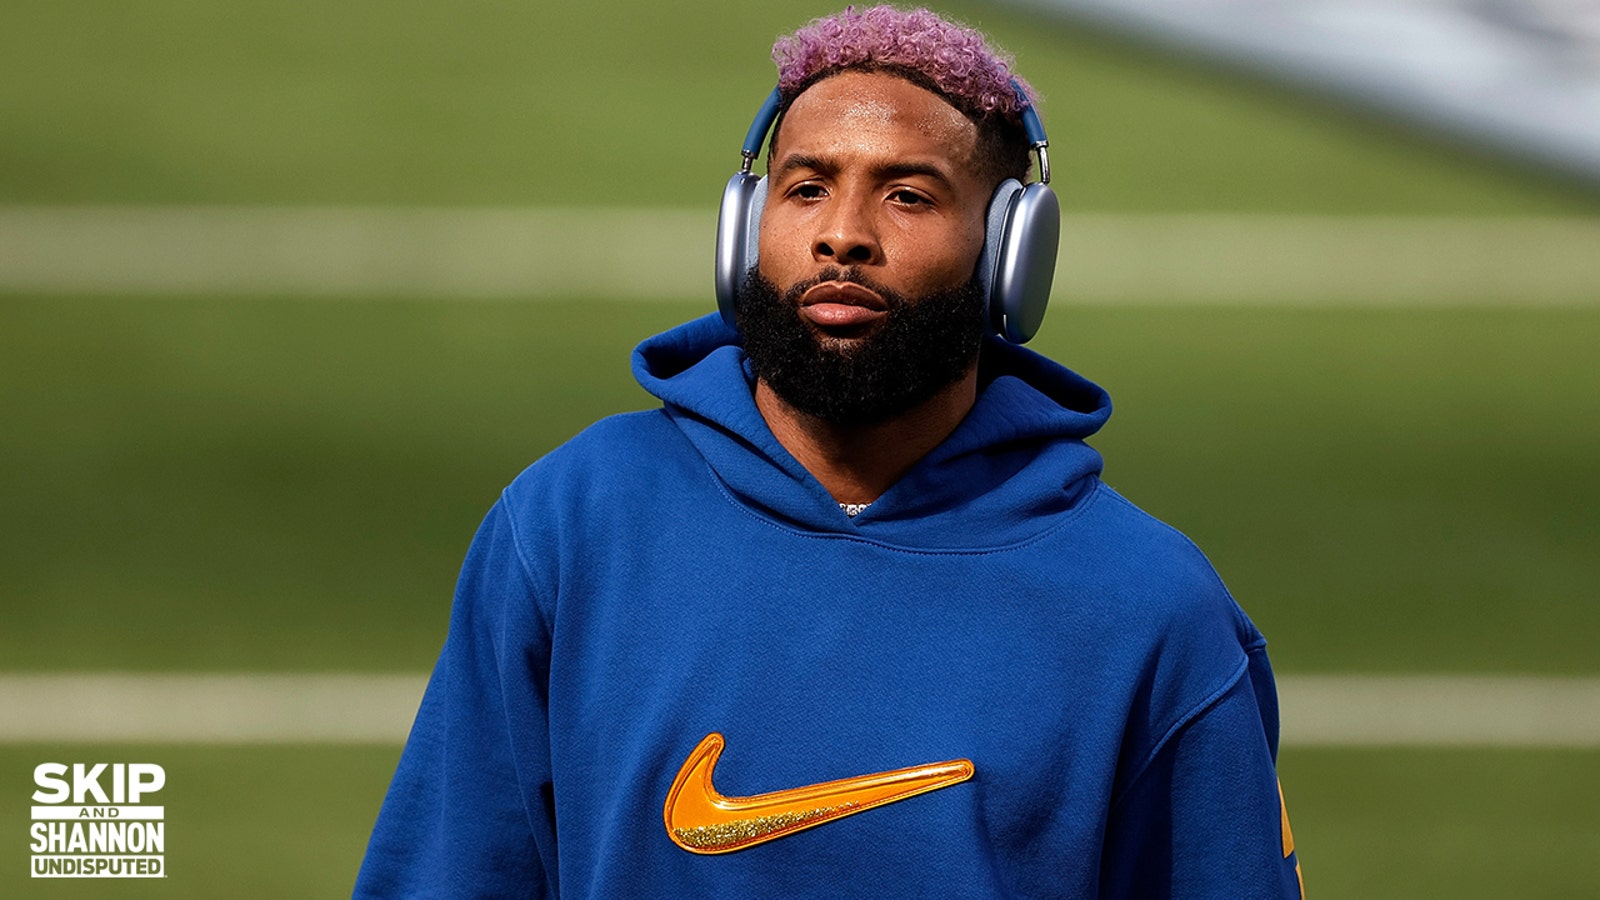 How confident are the Cowboys in signing Odell Beckham Jr. after medical evaluation?